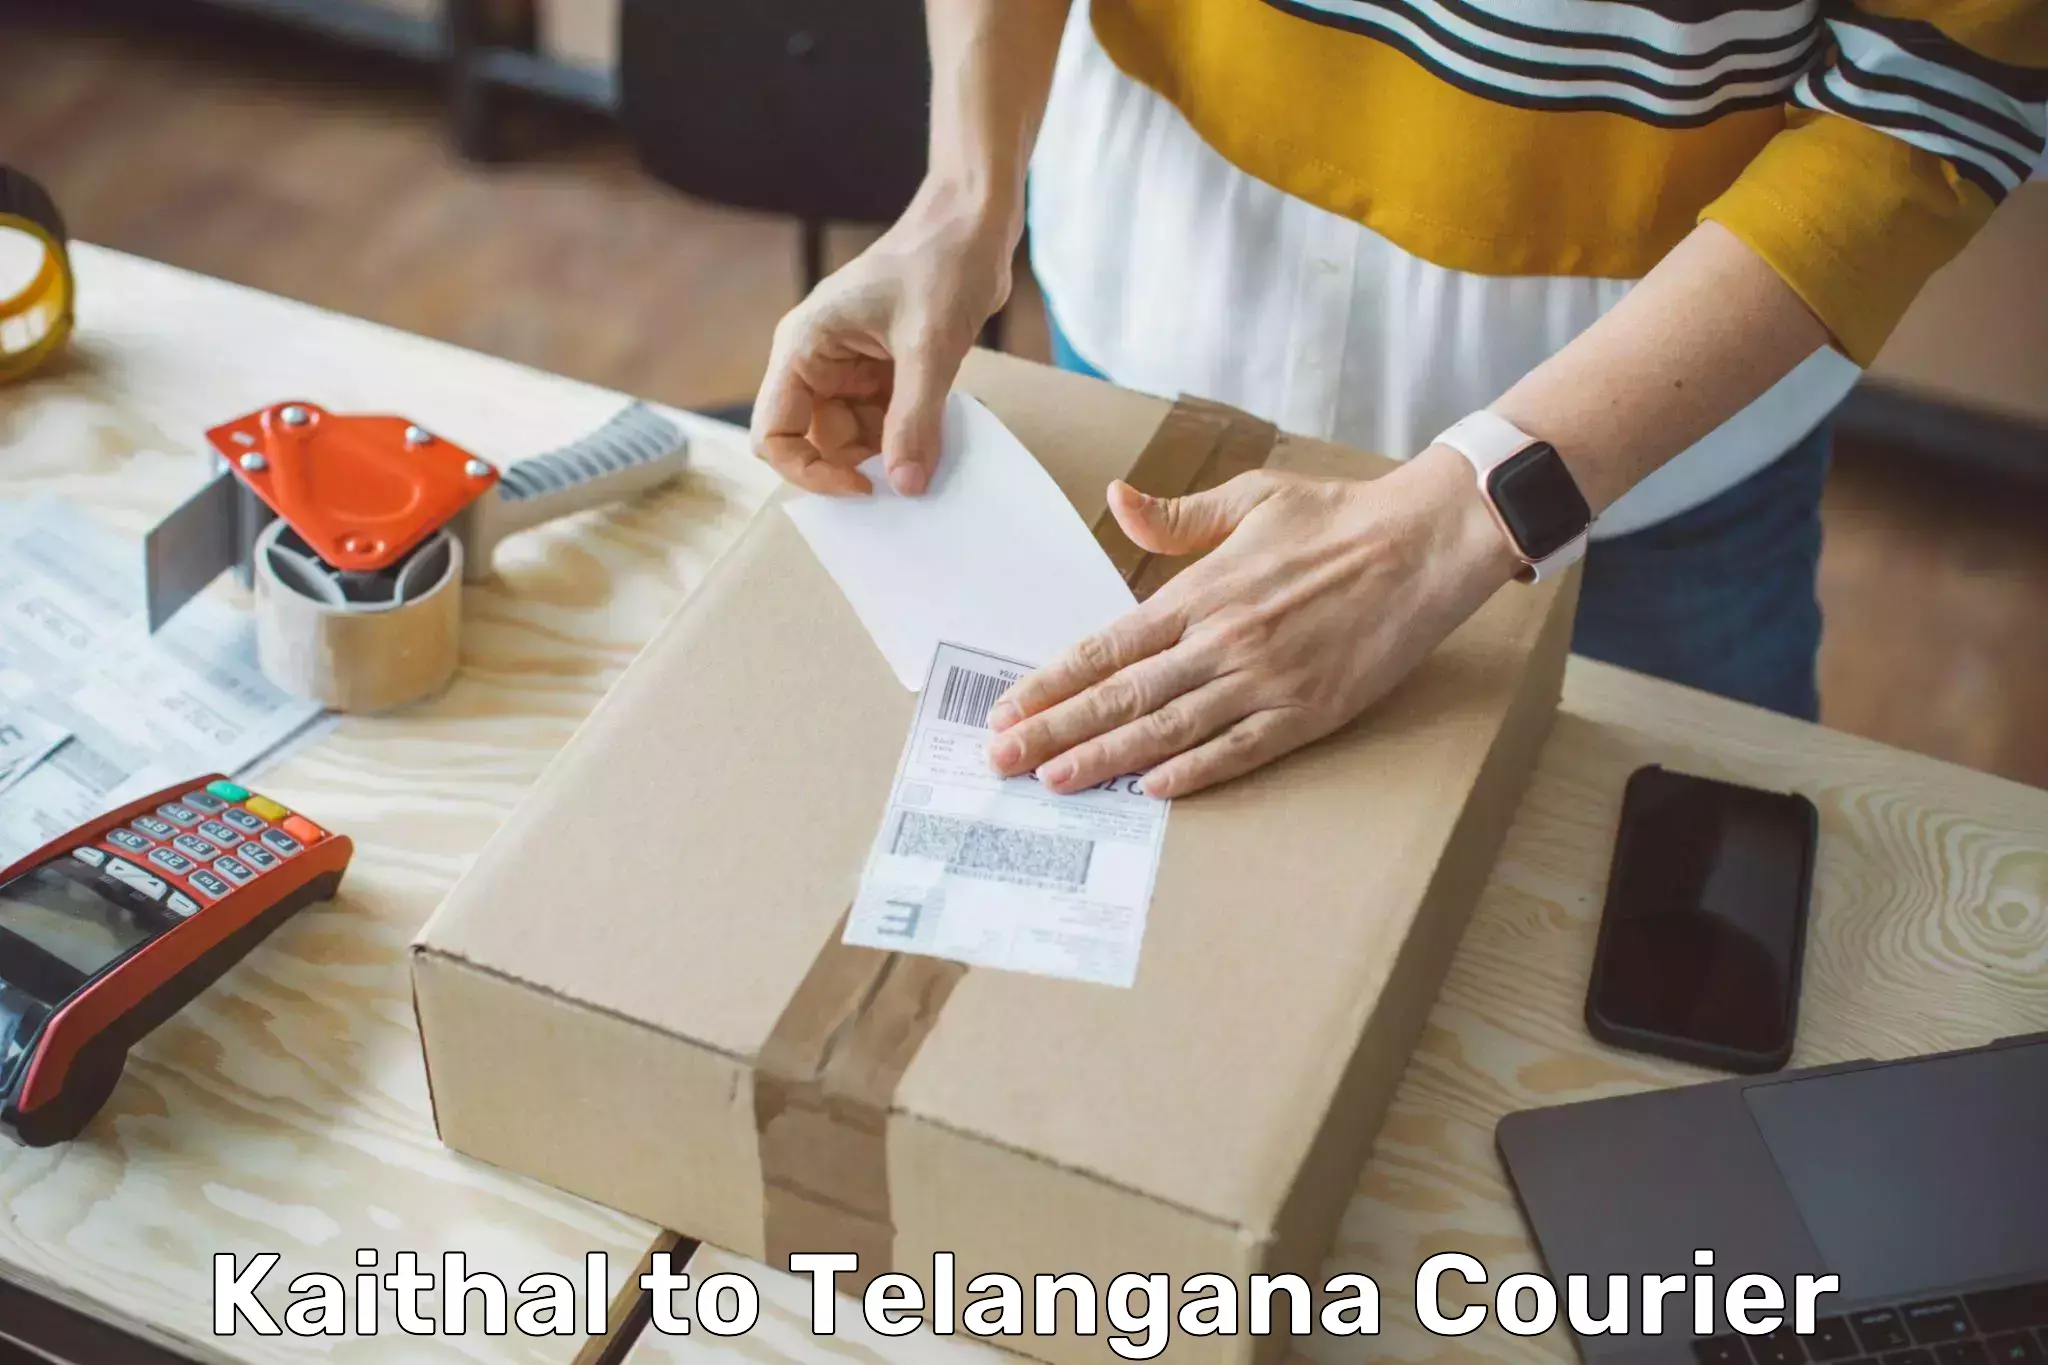 On-call courier service Kaithal to Khairatabad